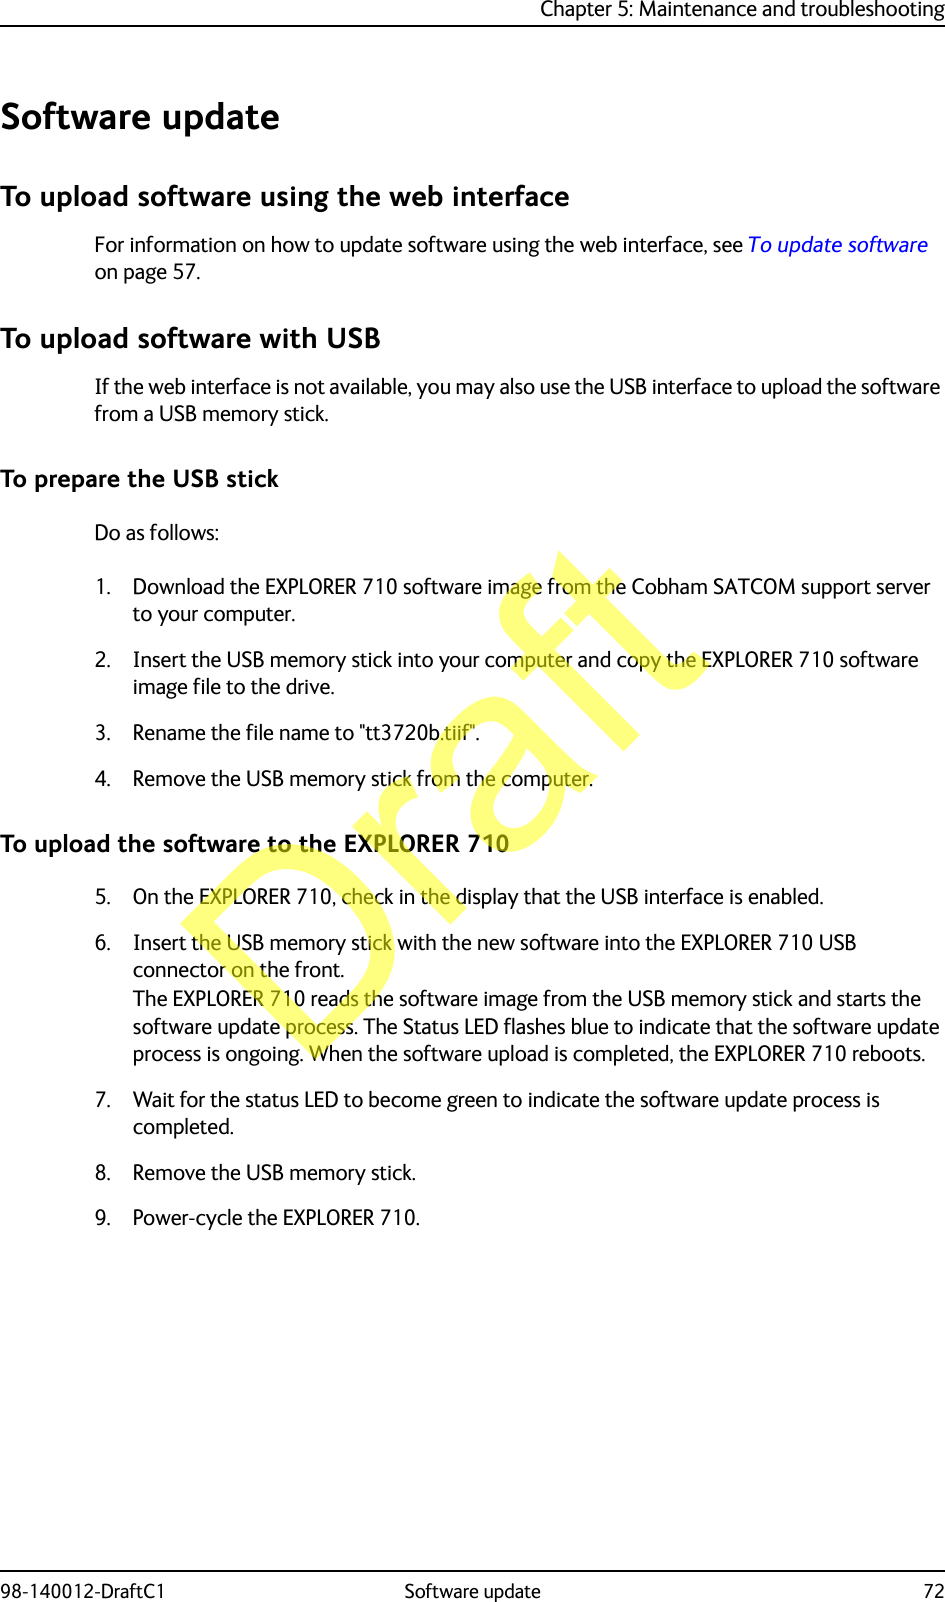 Chapter 5: Maintenance and troubleshooting98-140012-DraftC1 Software update 72Software updateTo upload software using the web interfaceFor information on how to update software using the web interface, see To update software on page 57.To upload software with USBIf the web interface is not available, you may also use the USB interface to upload the software from a USB memory stick.To prepare the USB stickDo as follows:1. Download the EXPLORER 710 software image from the Cobham SATCOM support server to your computer.2. Insert the USB memory stick into your computer and copy the EXPLORER 710 software image file to the drive.3. Rename the file name to &quot;tt3720b.tiif&quot;.4. Remove the USB memory stick from the computer. To upload the software to the EXPLORER 7105. On the EXPLORER 710, check in the display that the USB interface is enabled. 6. Insert the USB memory stick with the new software into the EXPLORER 710 USB connector on the front.The EXPLORER 710 reads the software image from the USB memory stick and starts the software update process. The Status LED flashes blue to indicate that the software update process is ongoing. When the software upload is completed, the EXPLORER 710 reboots. 7. Wait for the status LED to become green to indicate the software update process is completed.8. Remove the USB memory stick.9. Power-cycle the EXPLORER 710.Draft